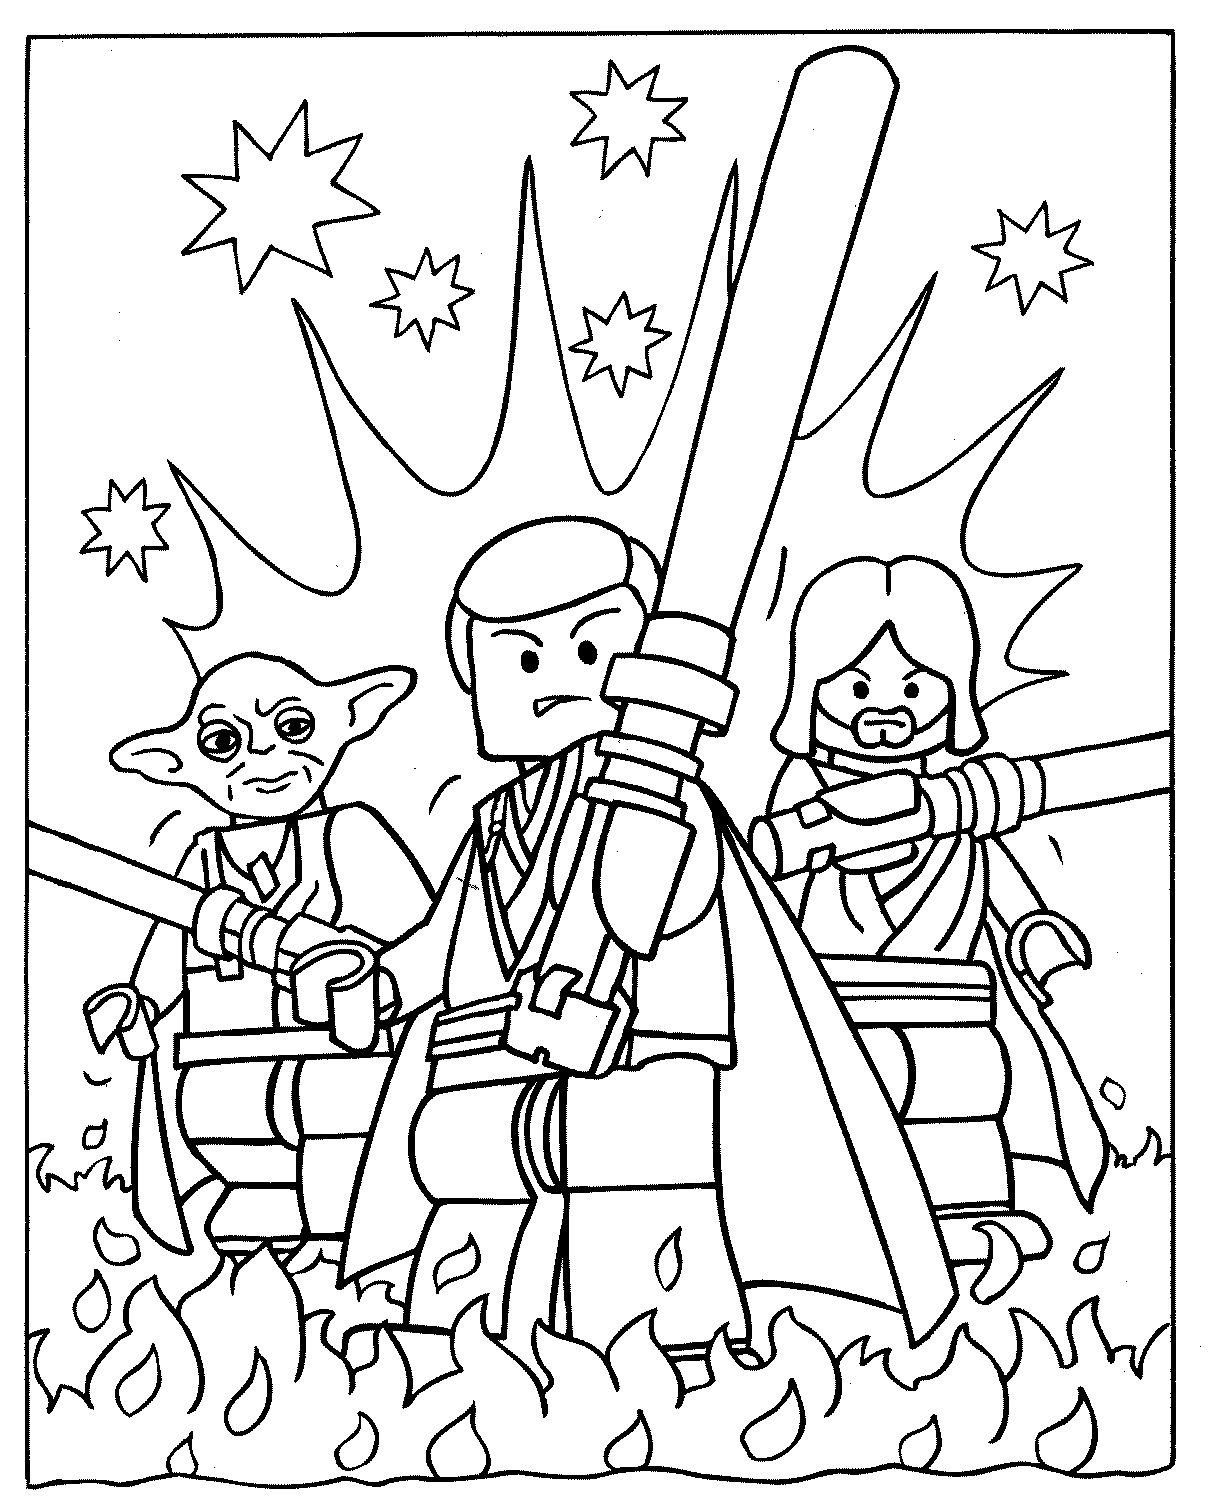 Lego Star Wars Coloring Pages To Print
 Free Printable Star Wars Coloring Pages For Kids